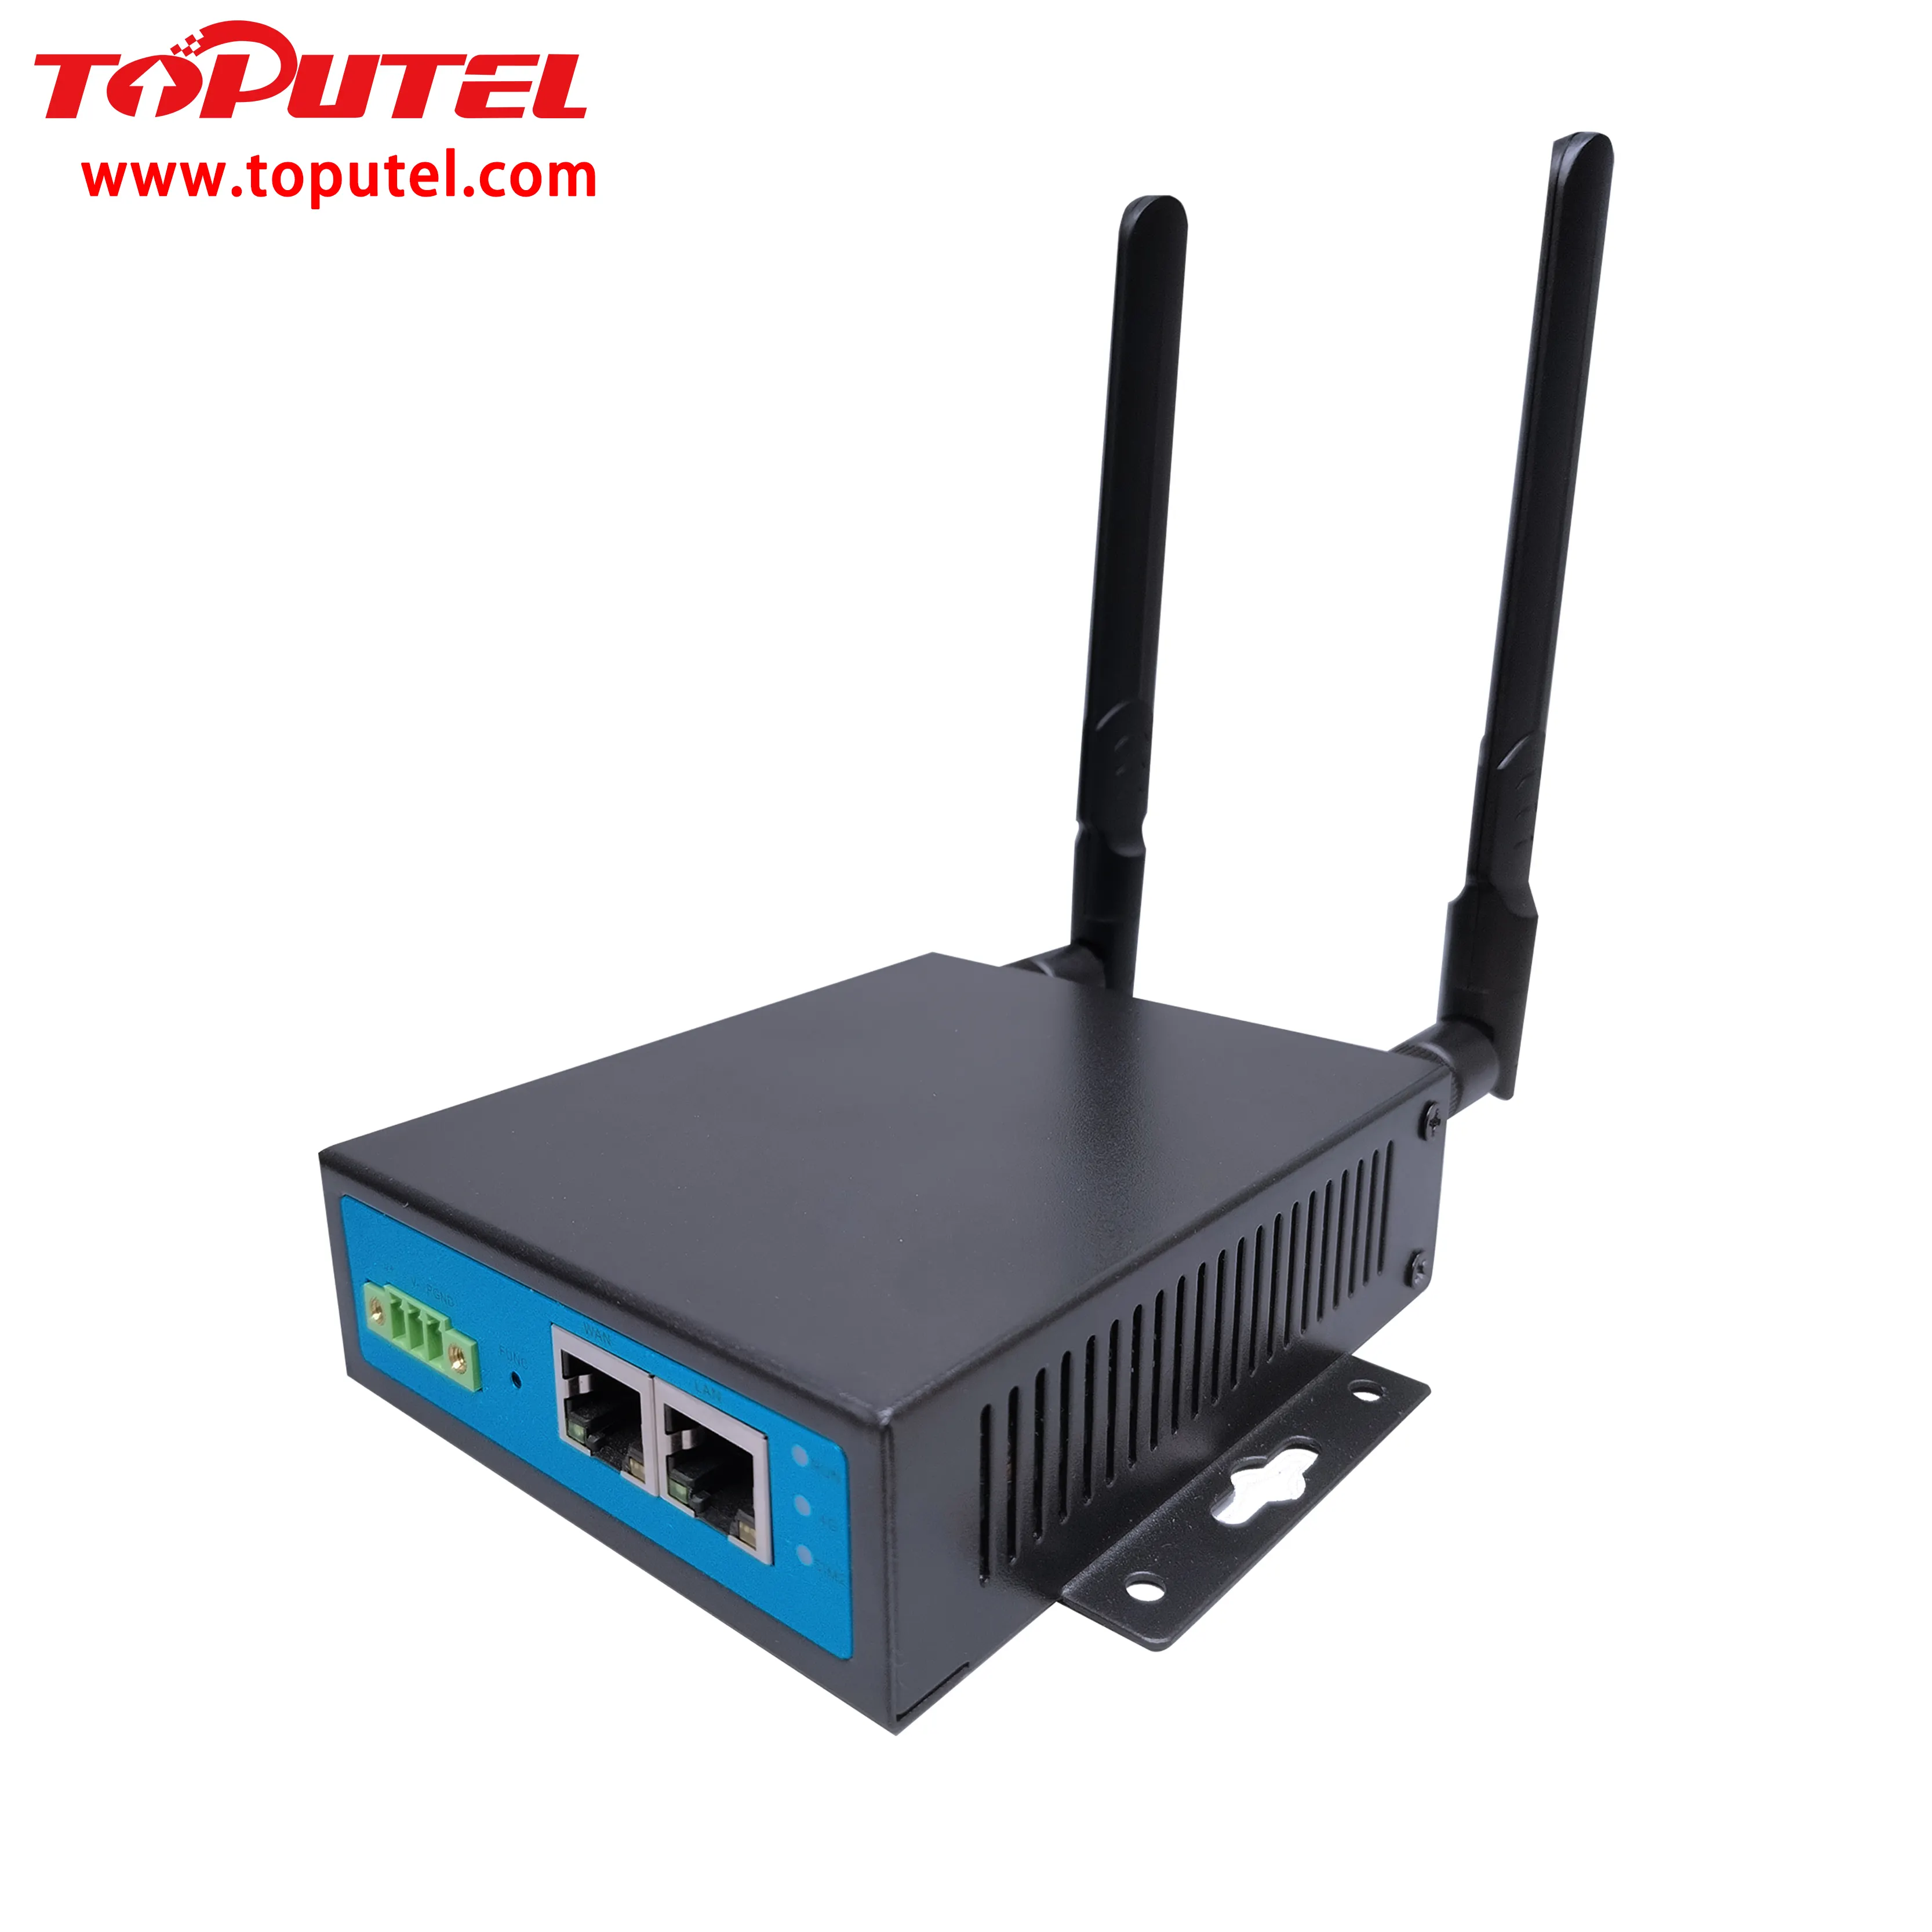 4G industrial router for IoT VPN customization+Free software for devices management+Dual SIM+ relay output+ RS485 Modbus to MQTT